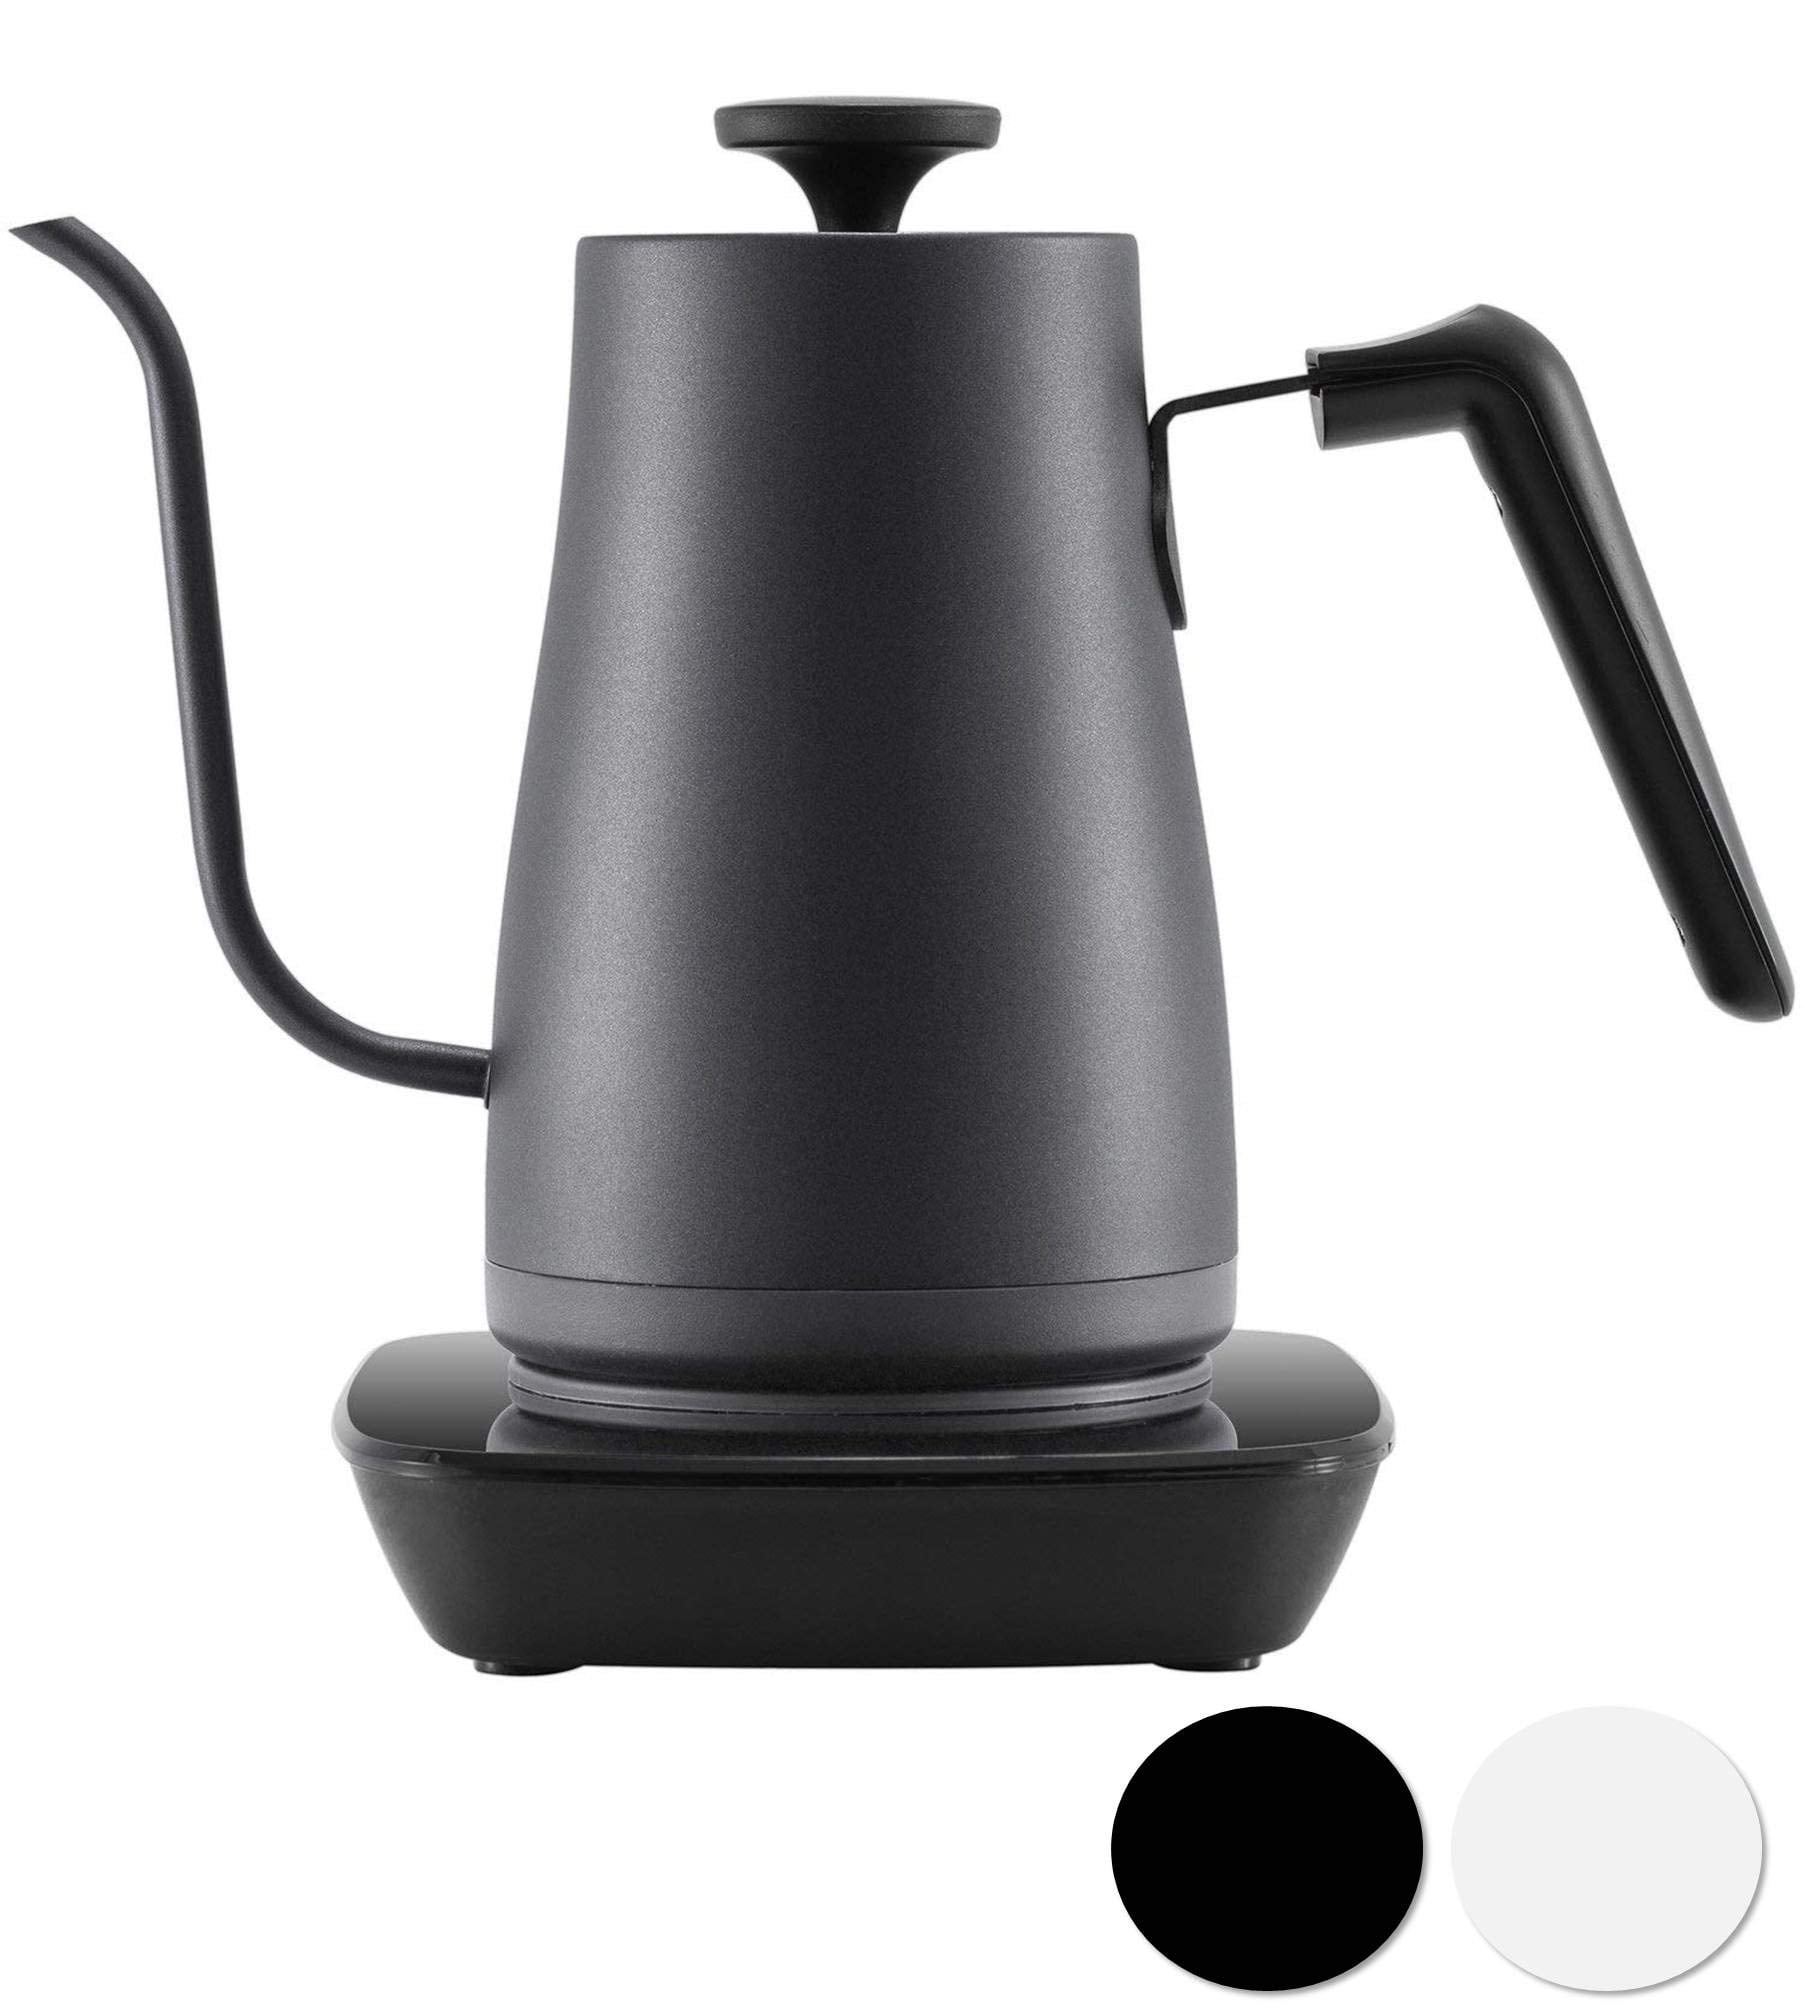 Yamazen] Electric kettle Electric kettle 1.5L Large capacity